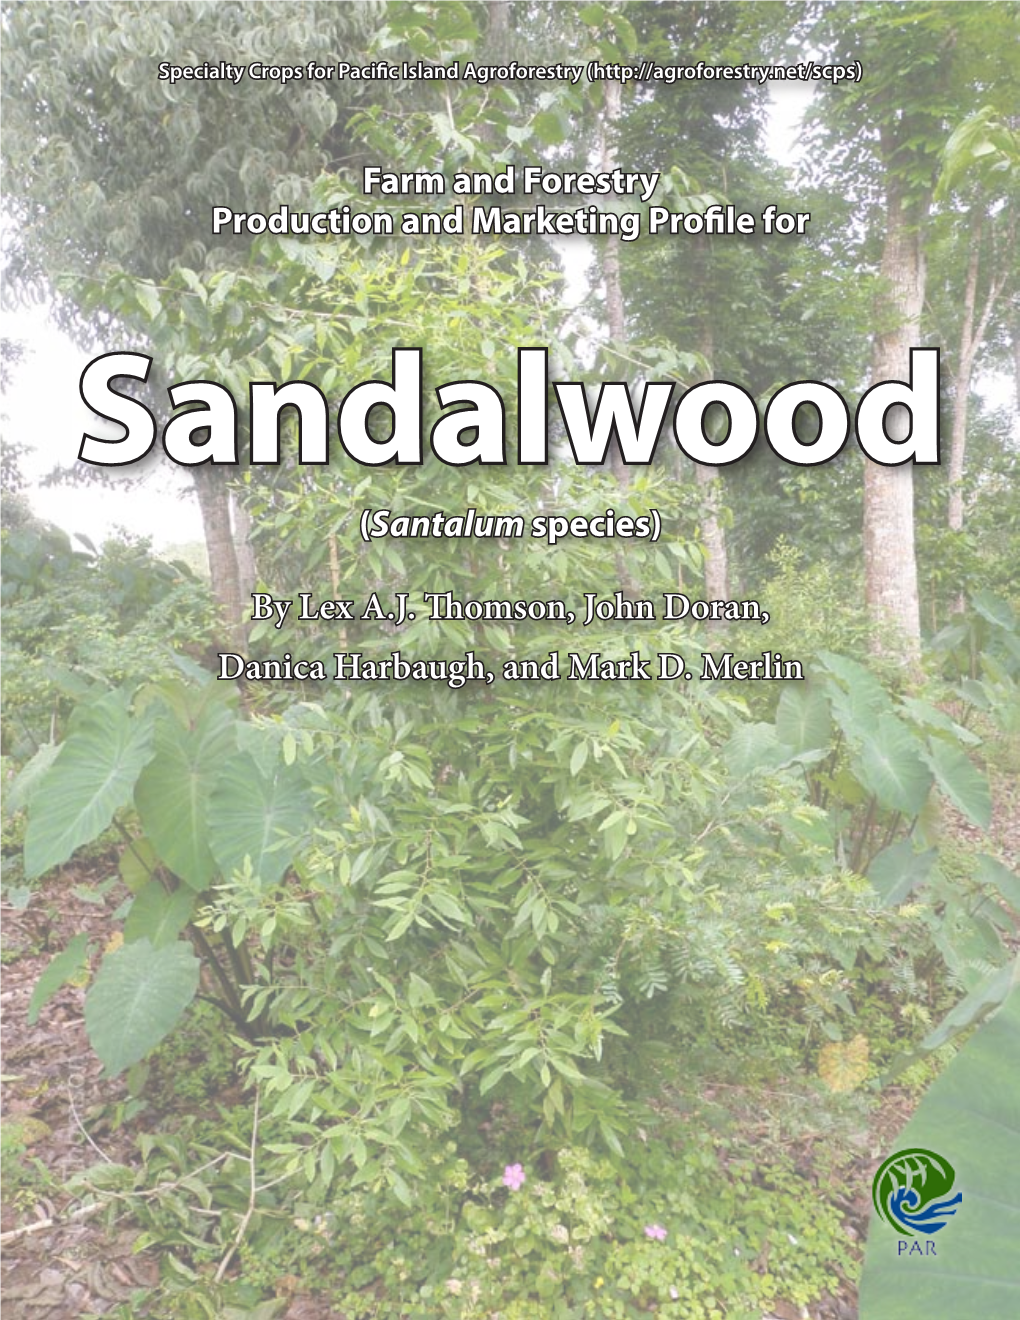 Farm and Forestry Production and Marketing Profile for Sandalwood (Santalum Species)